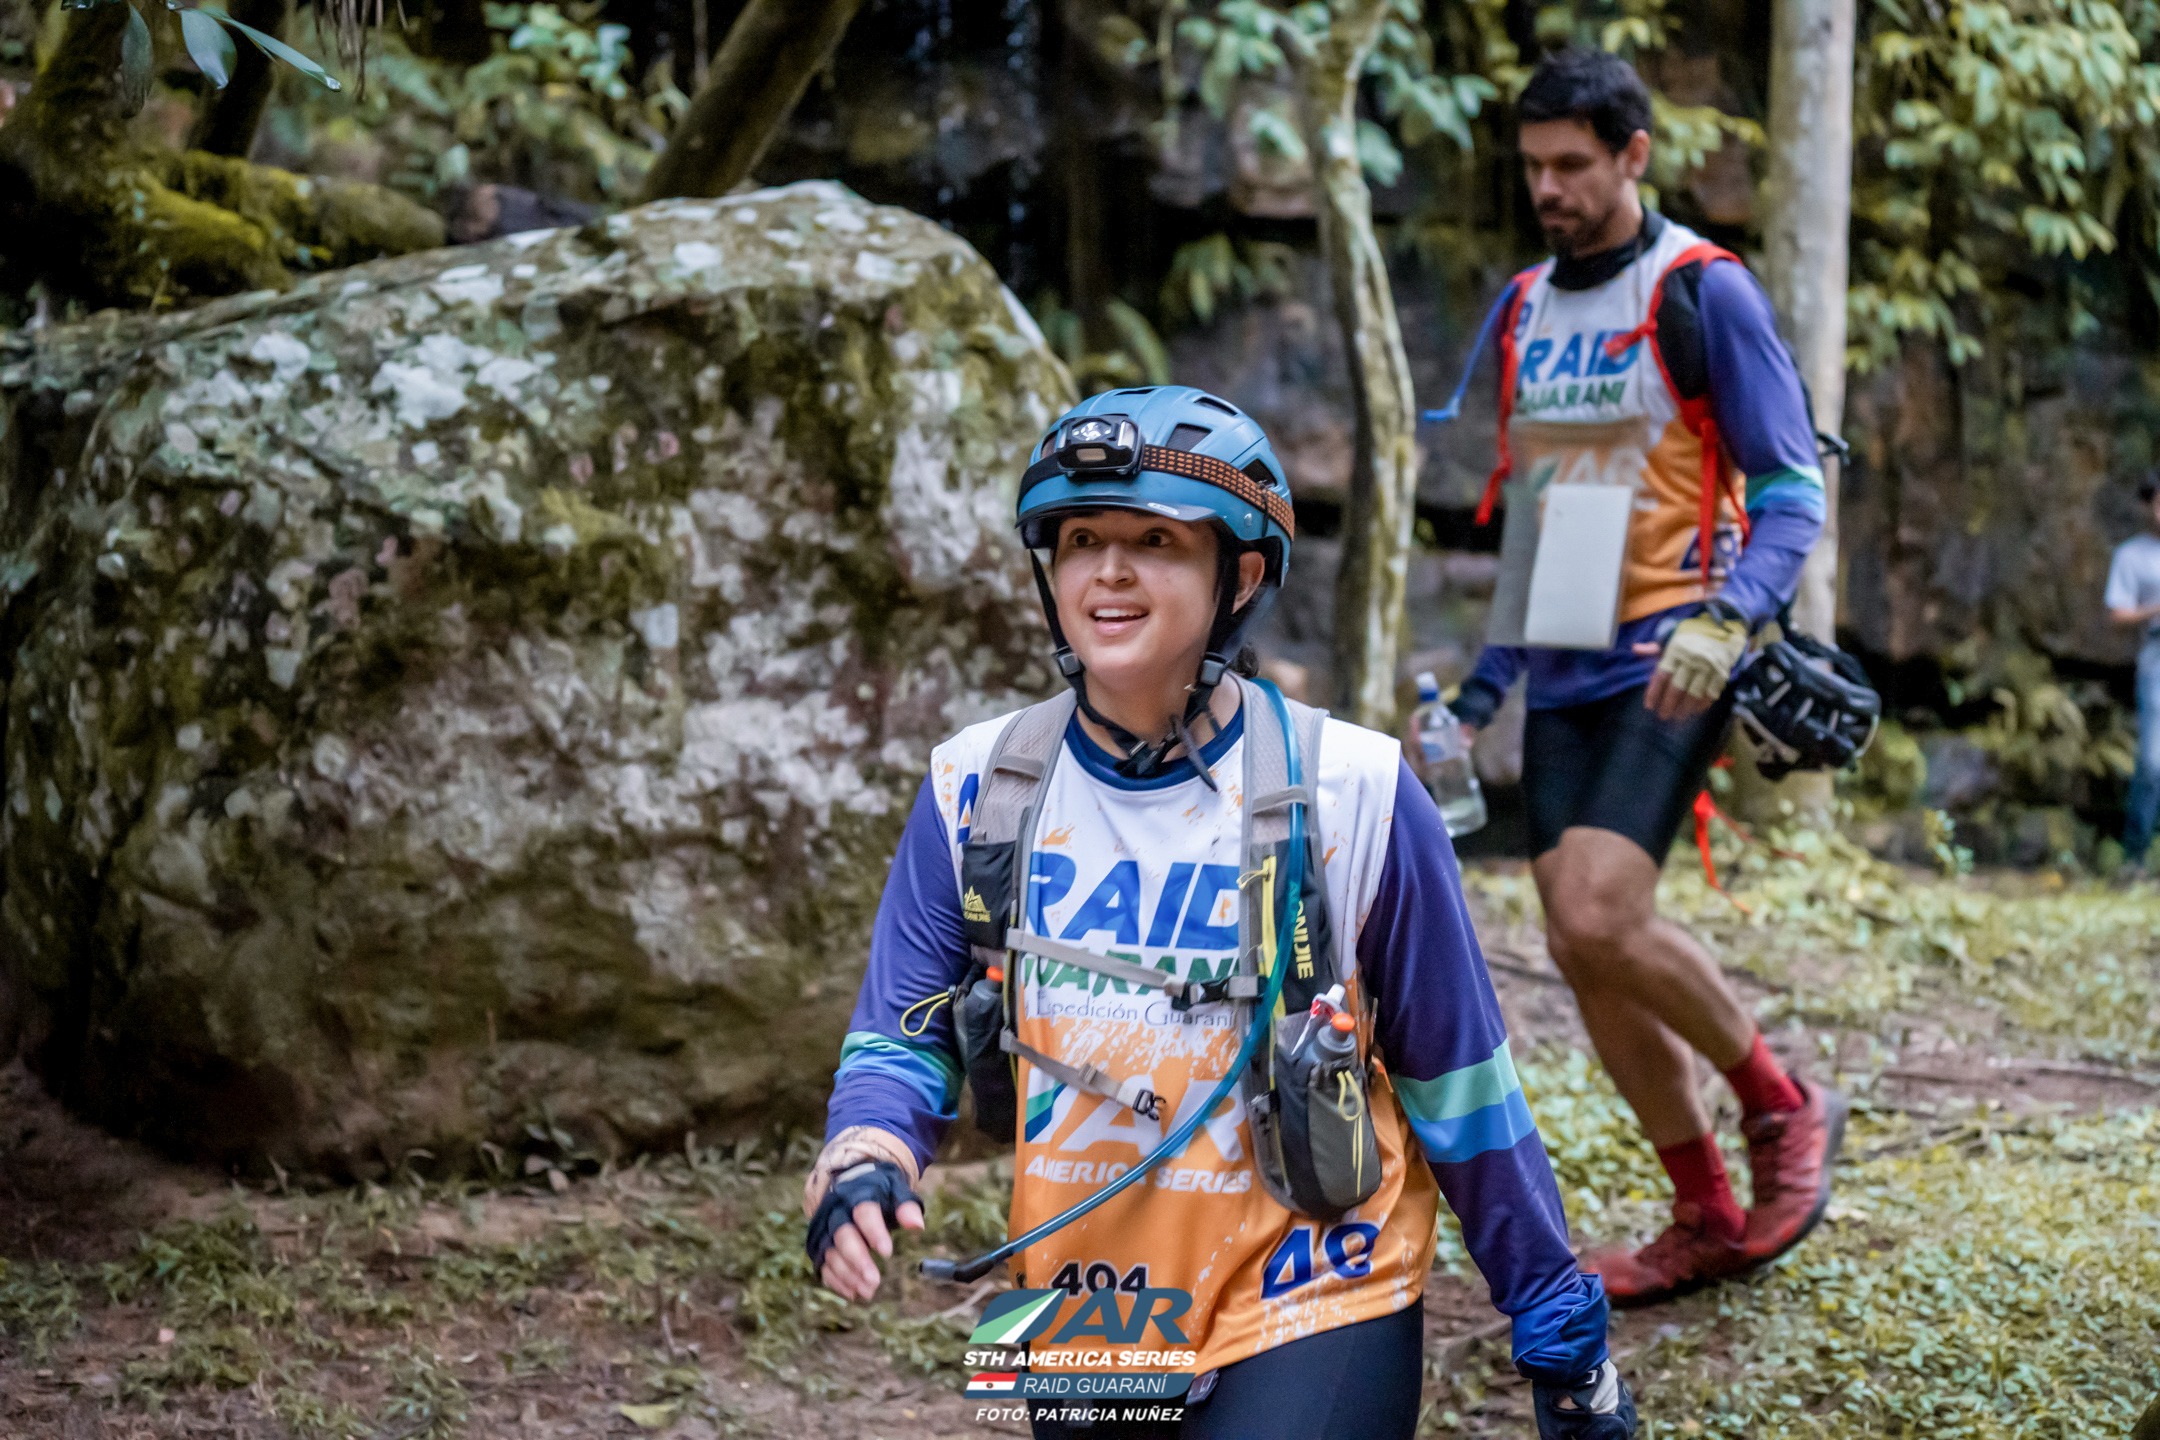 With activations by Esportes da Sorte, Guarani hosts 4th official club race  - ﻿Games Magazine Brasil